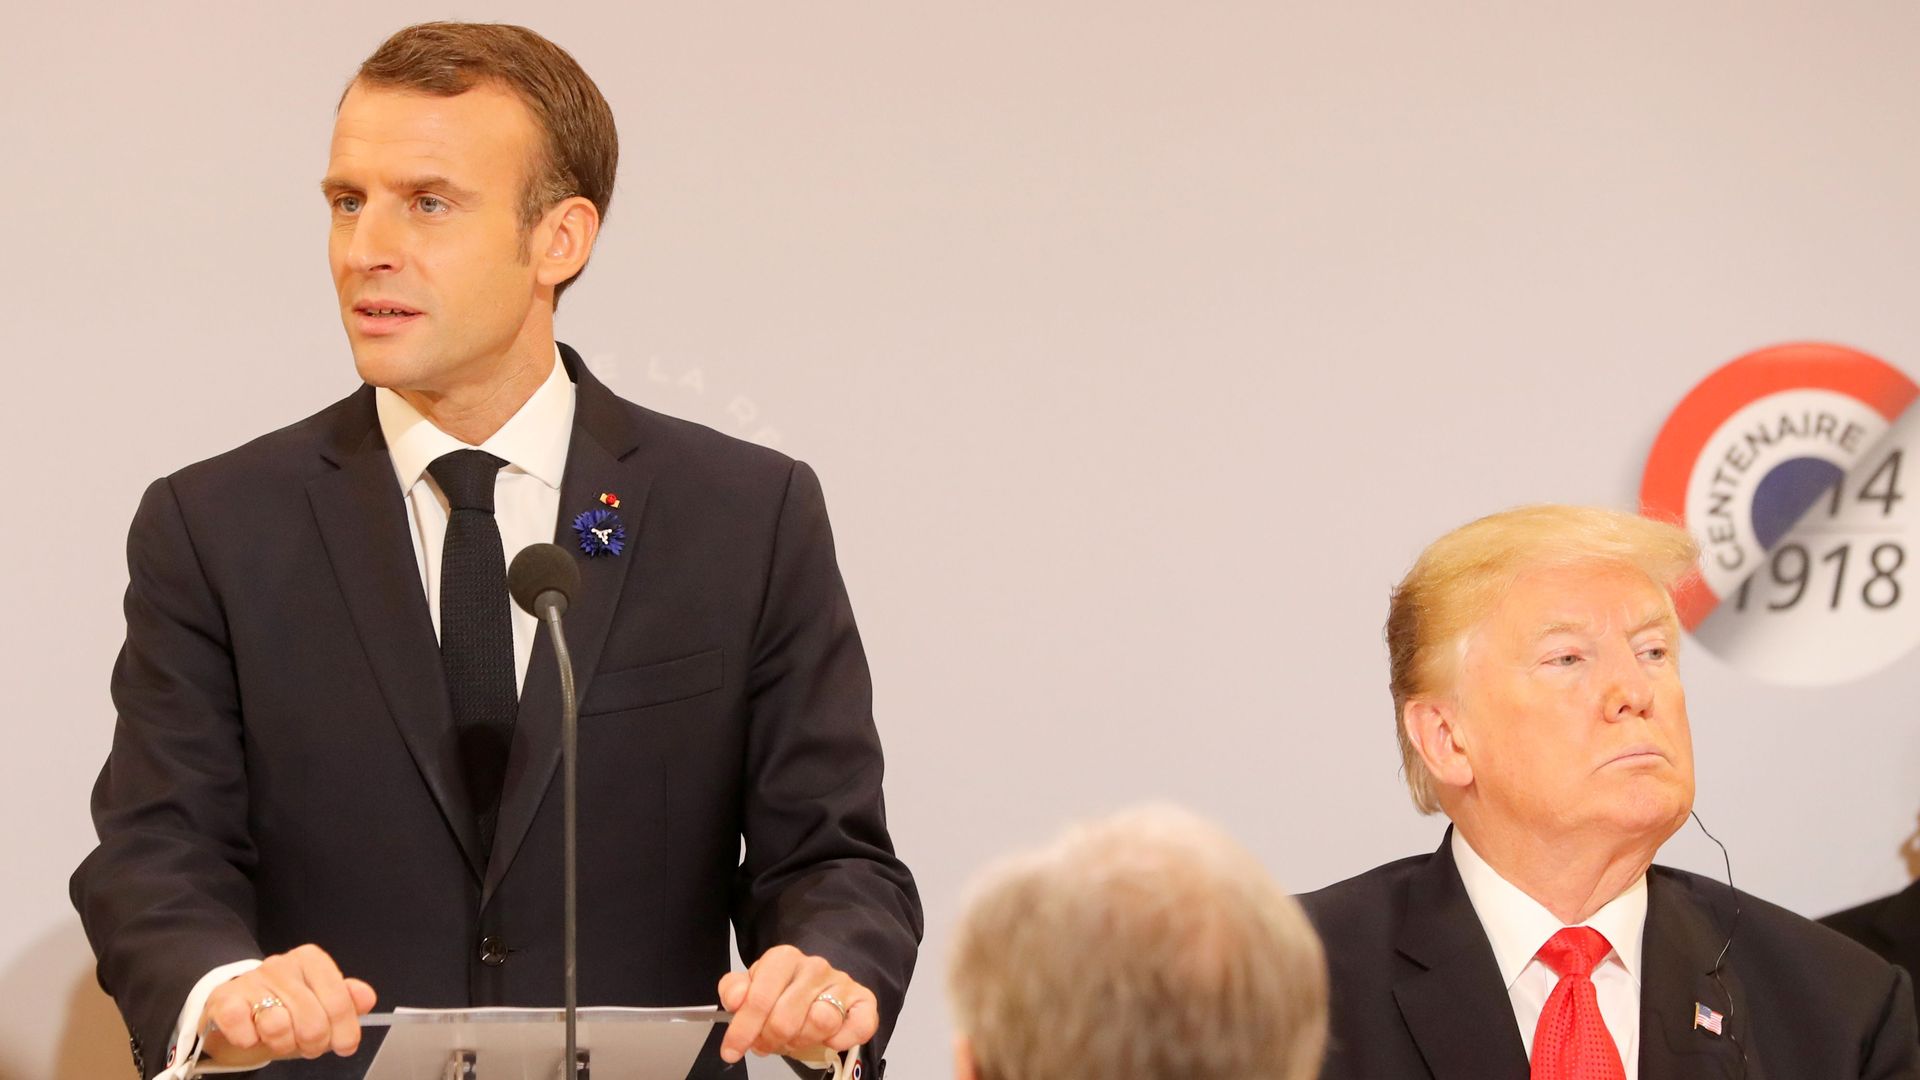 Photo of Trump and Macron looking in opposite directions.